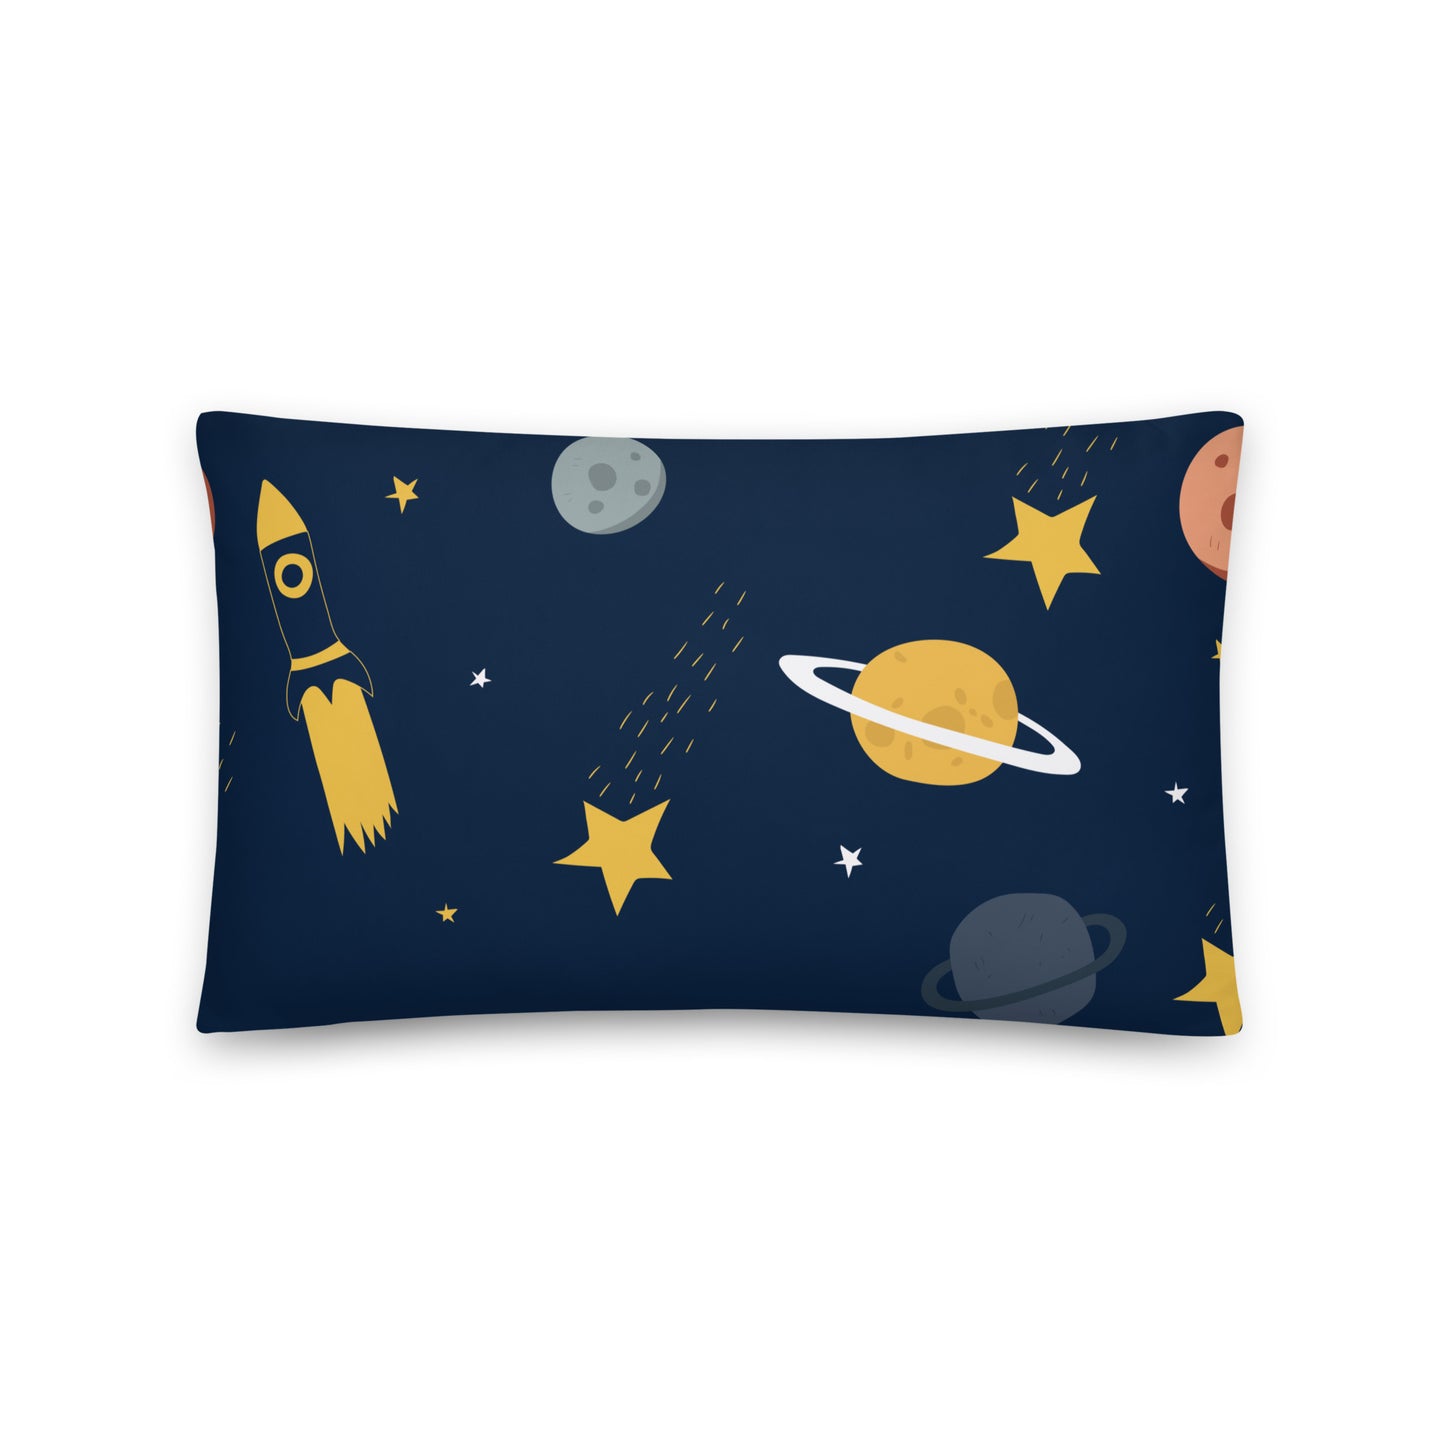 Outer Space - Sustainably Made Pillows